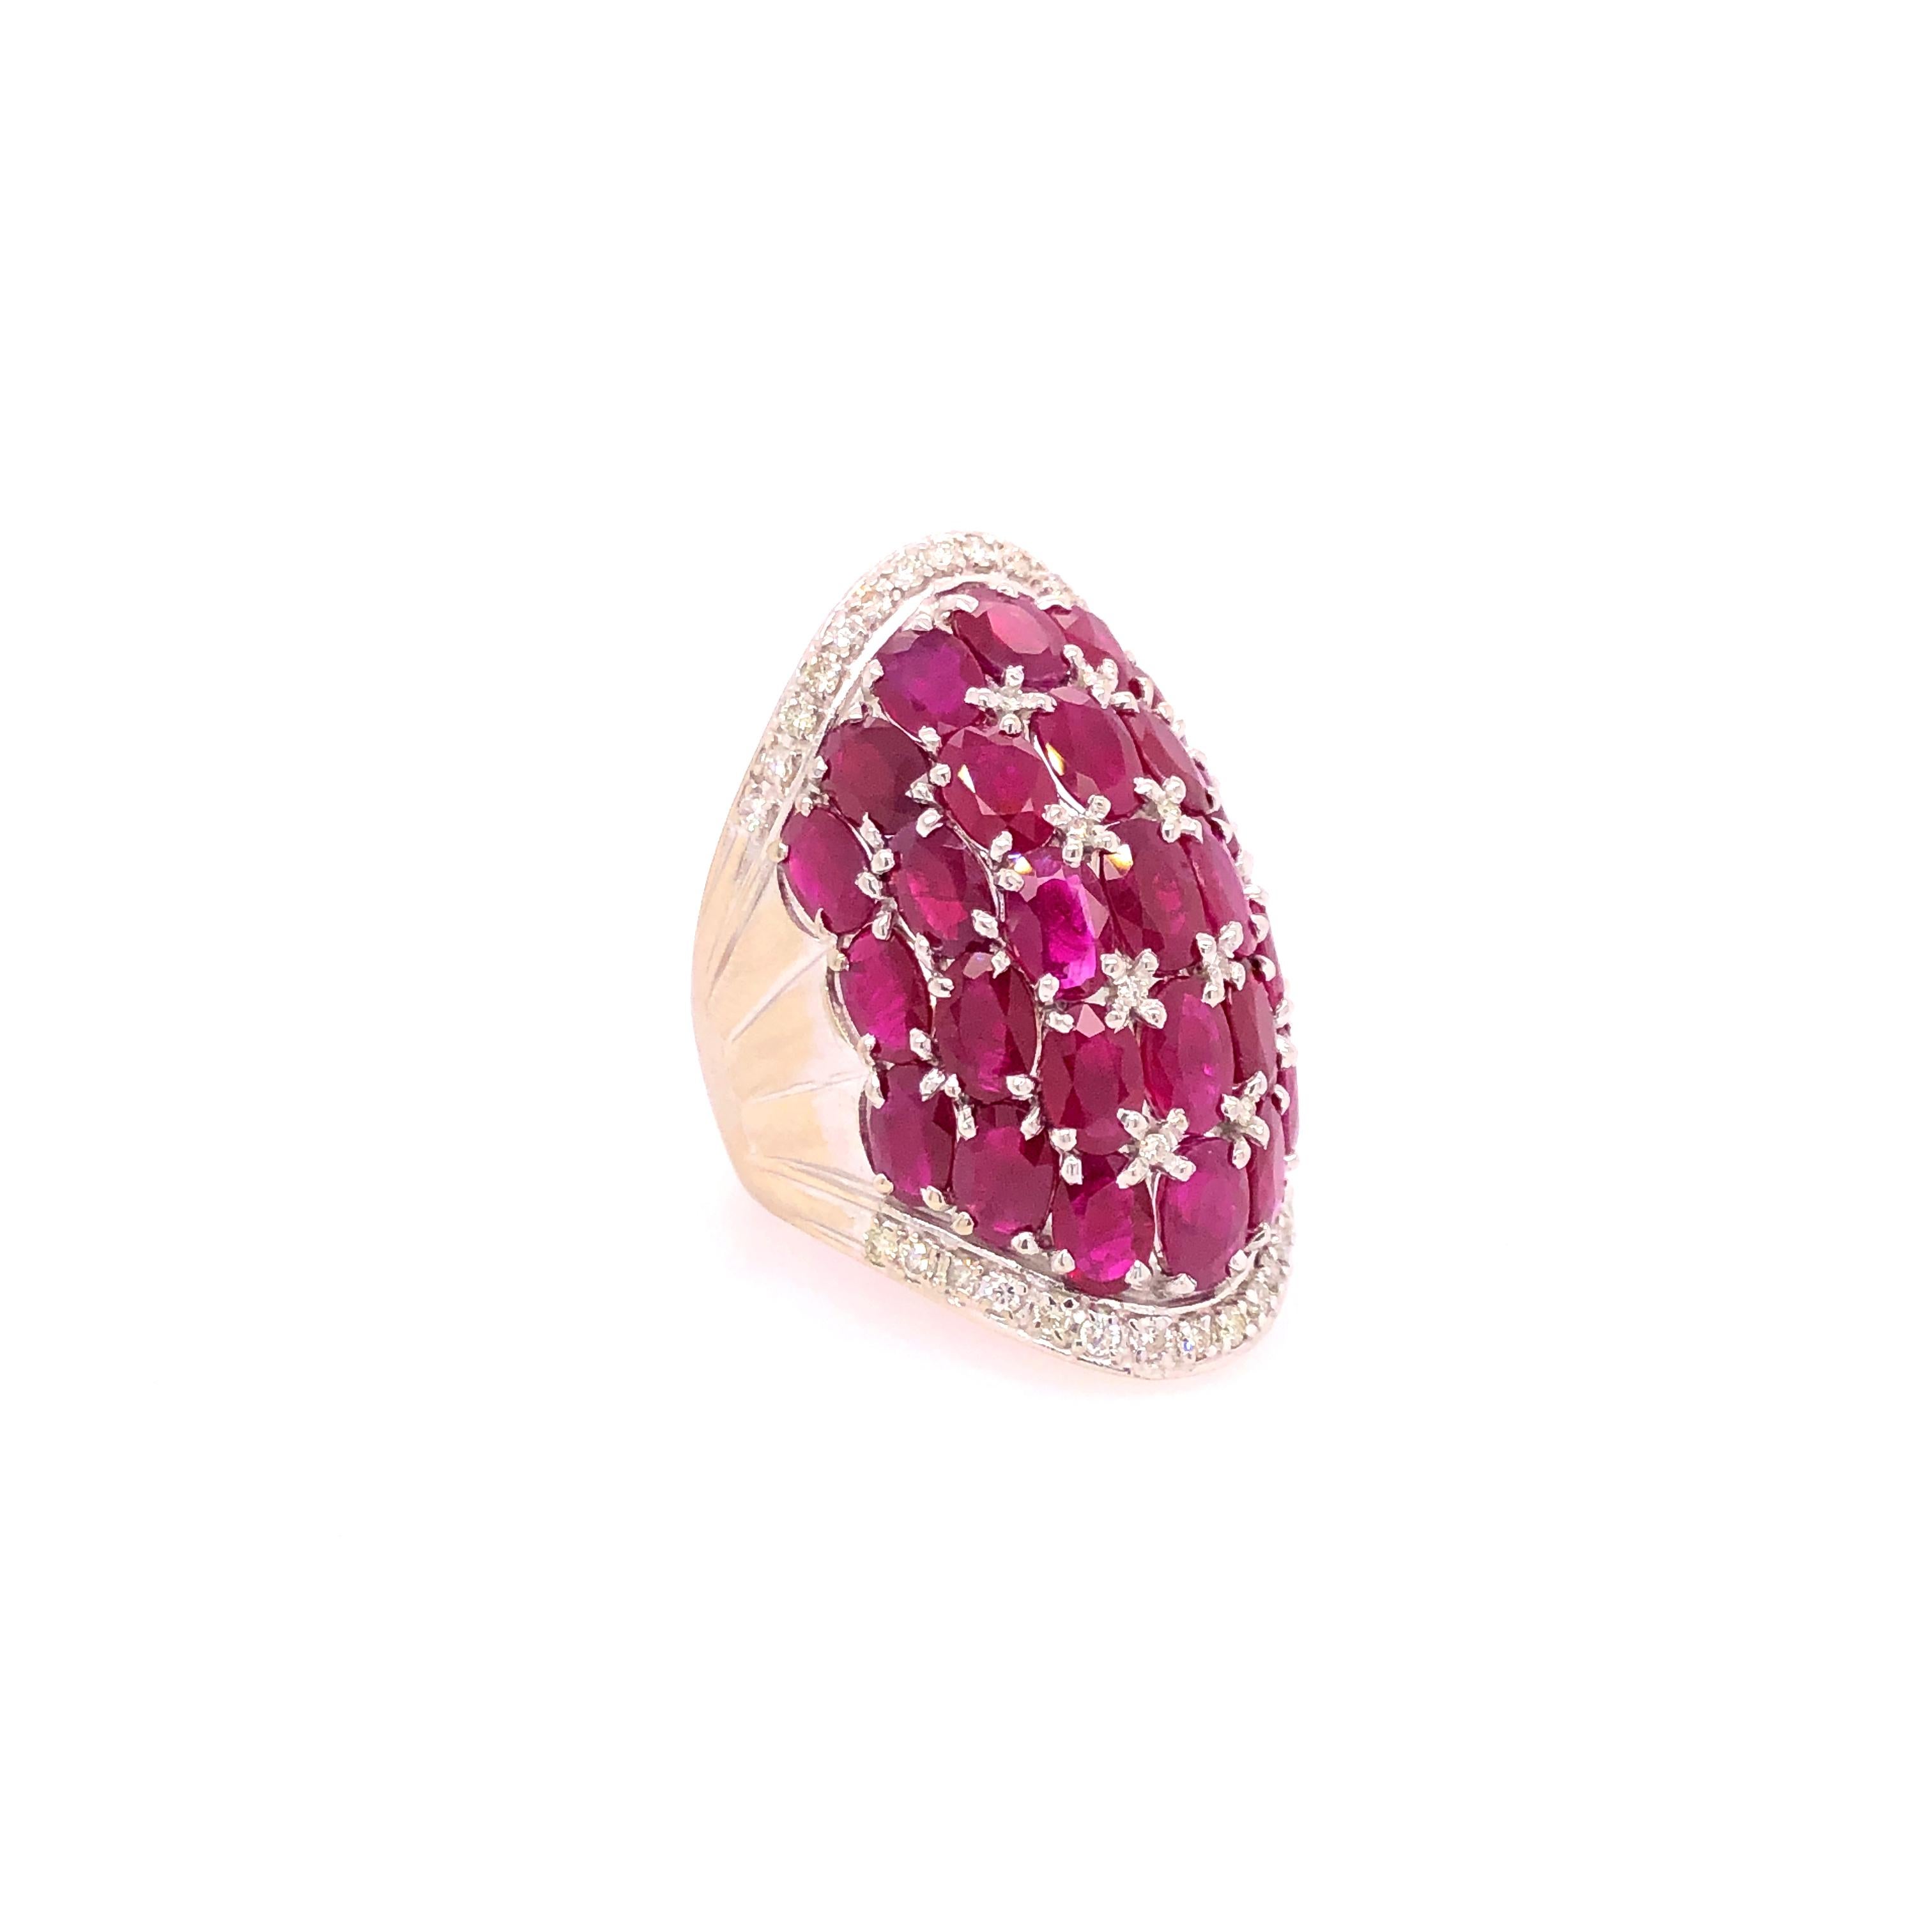 Anglo-Indian Large White Gold Oval Ruby and Diamond Knuckle Ring